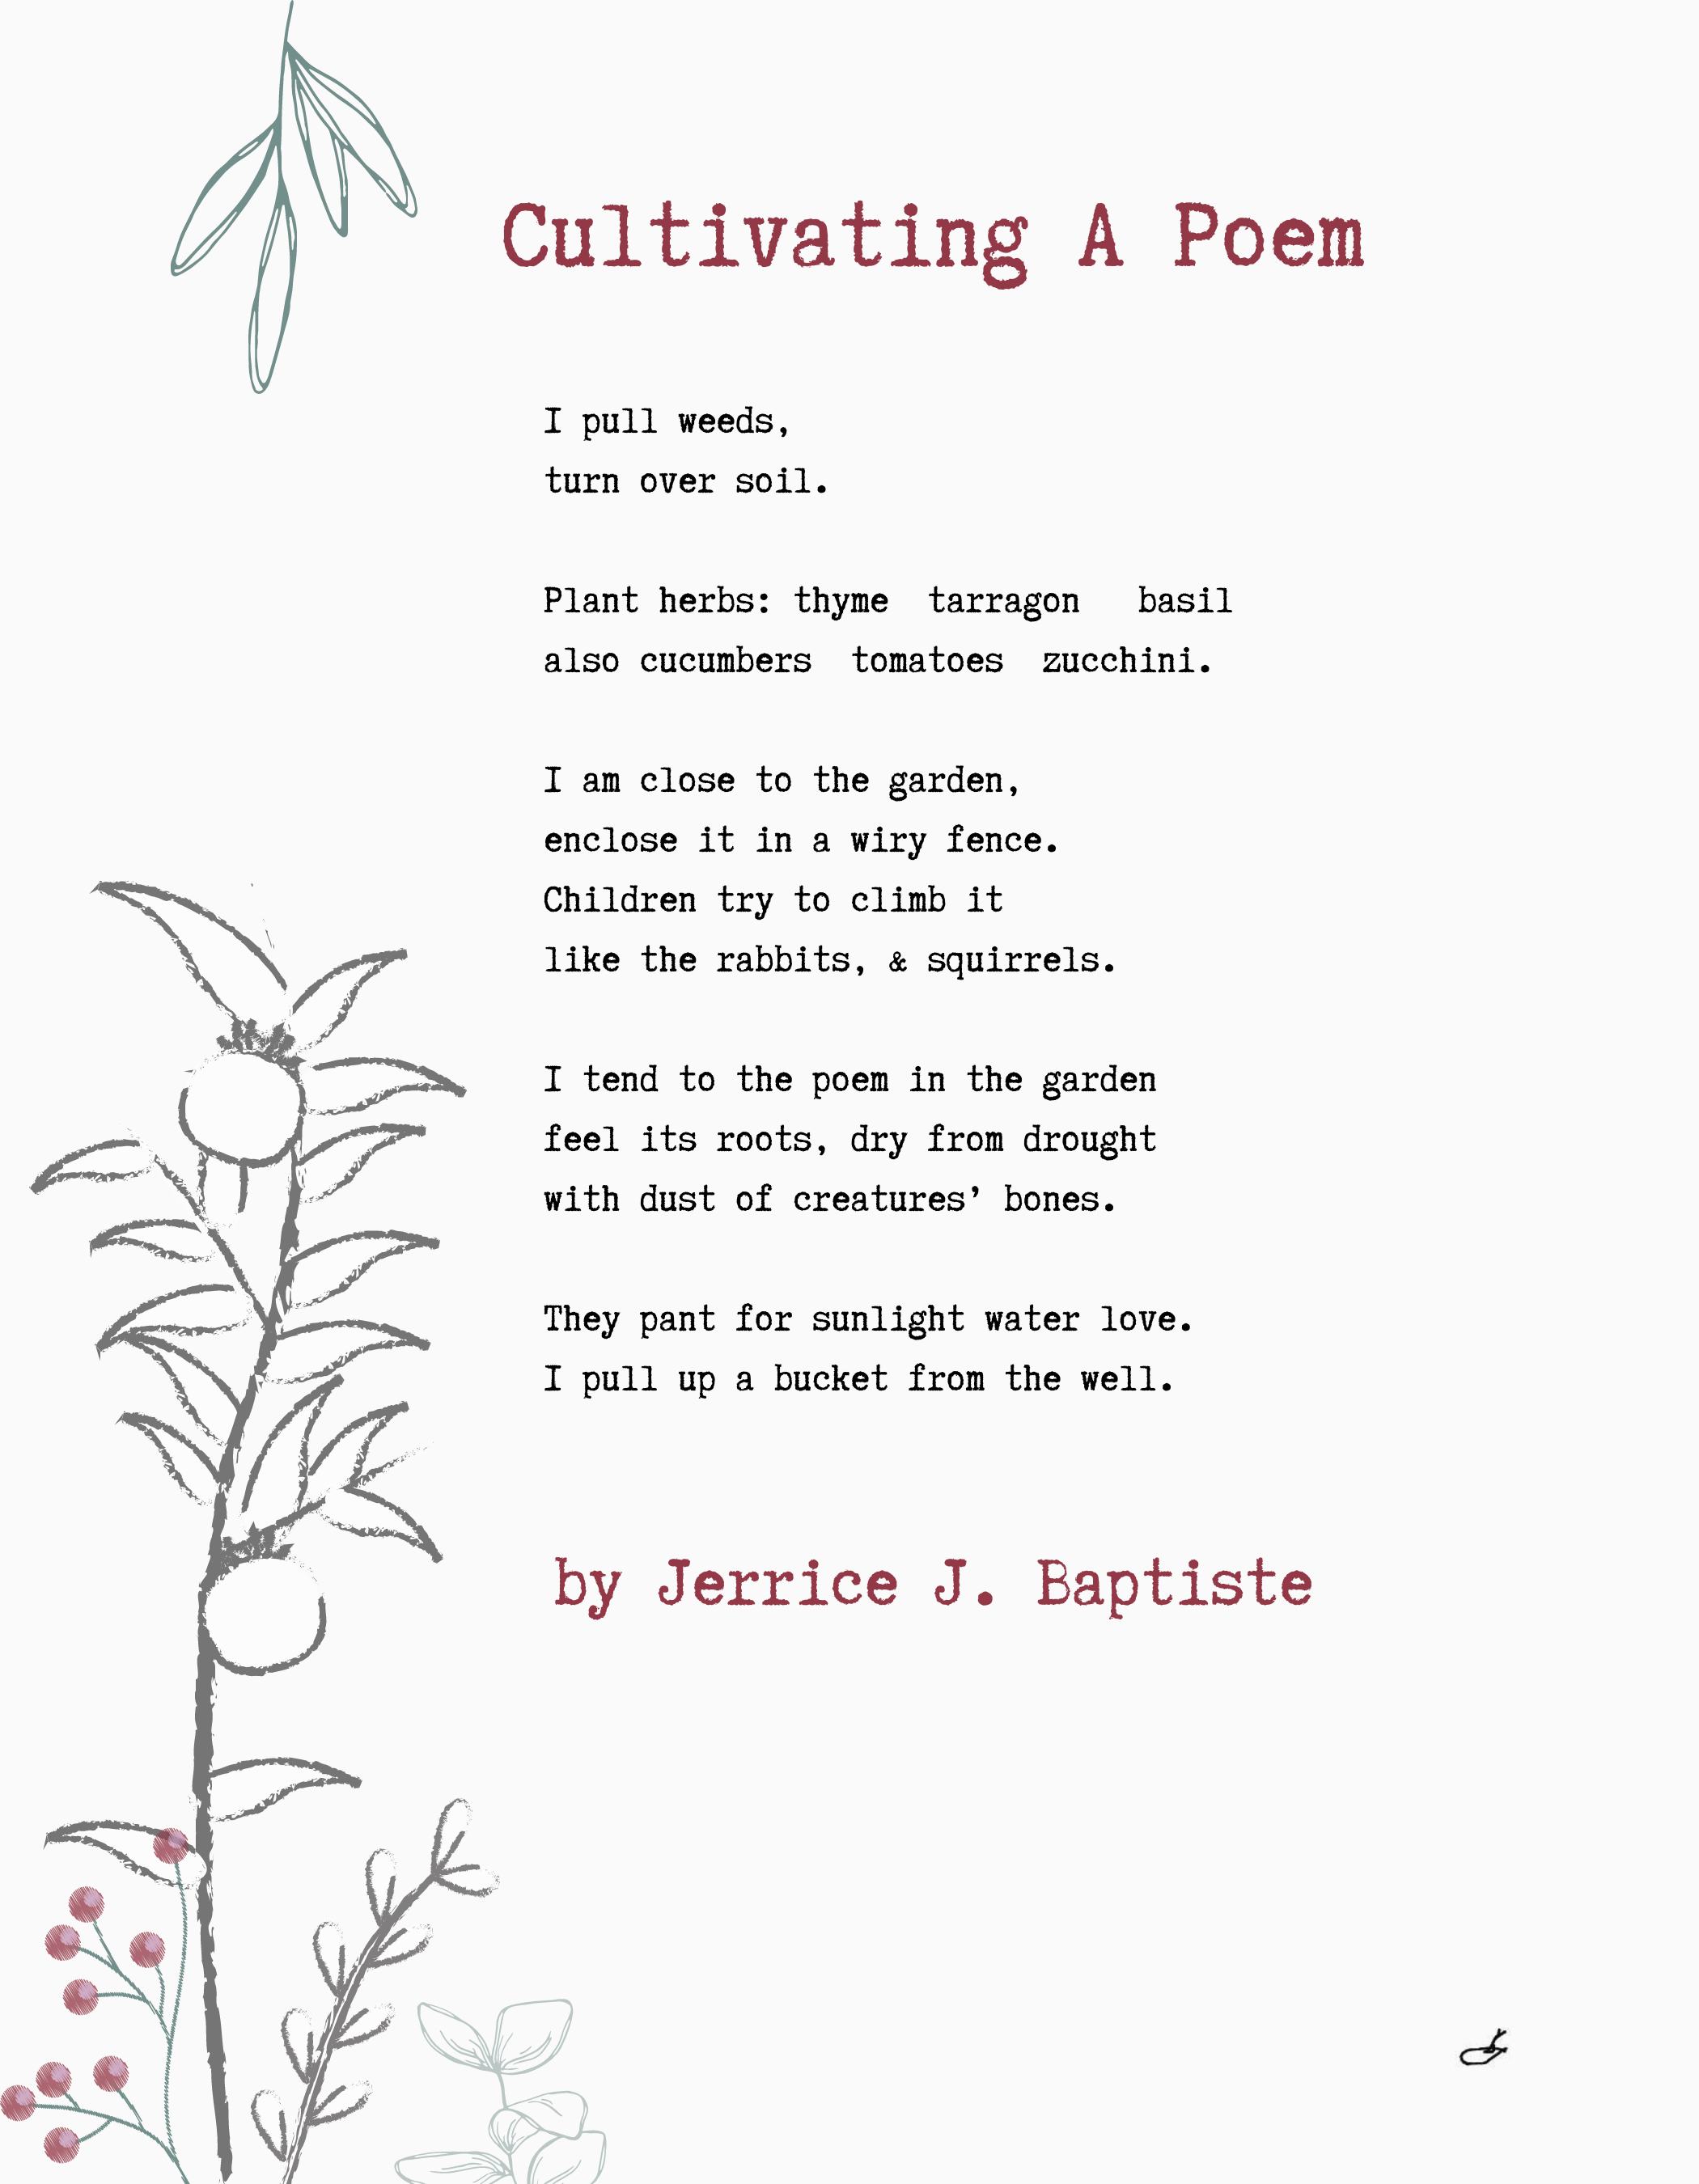 My father planted a garden poem